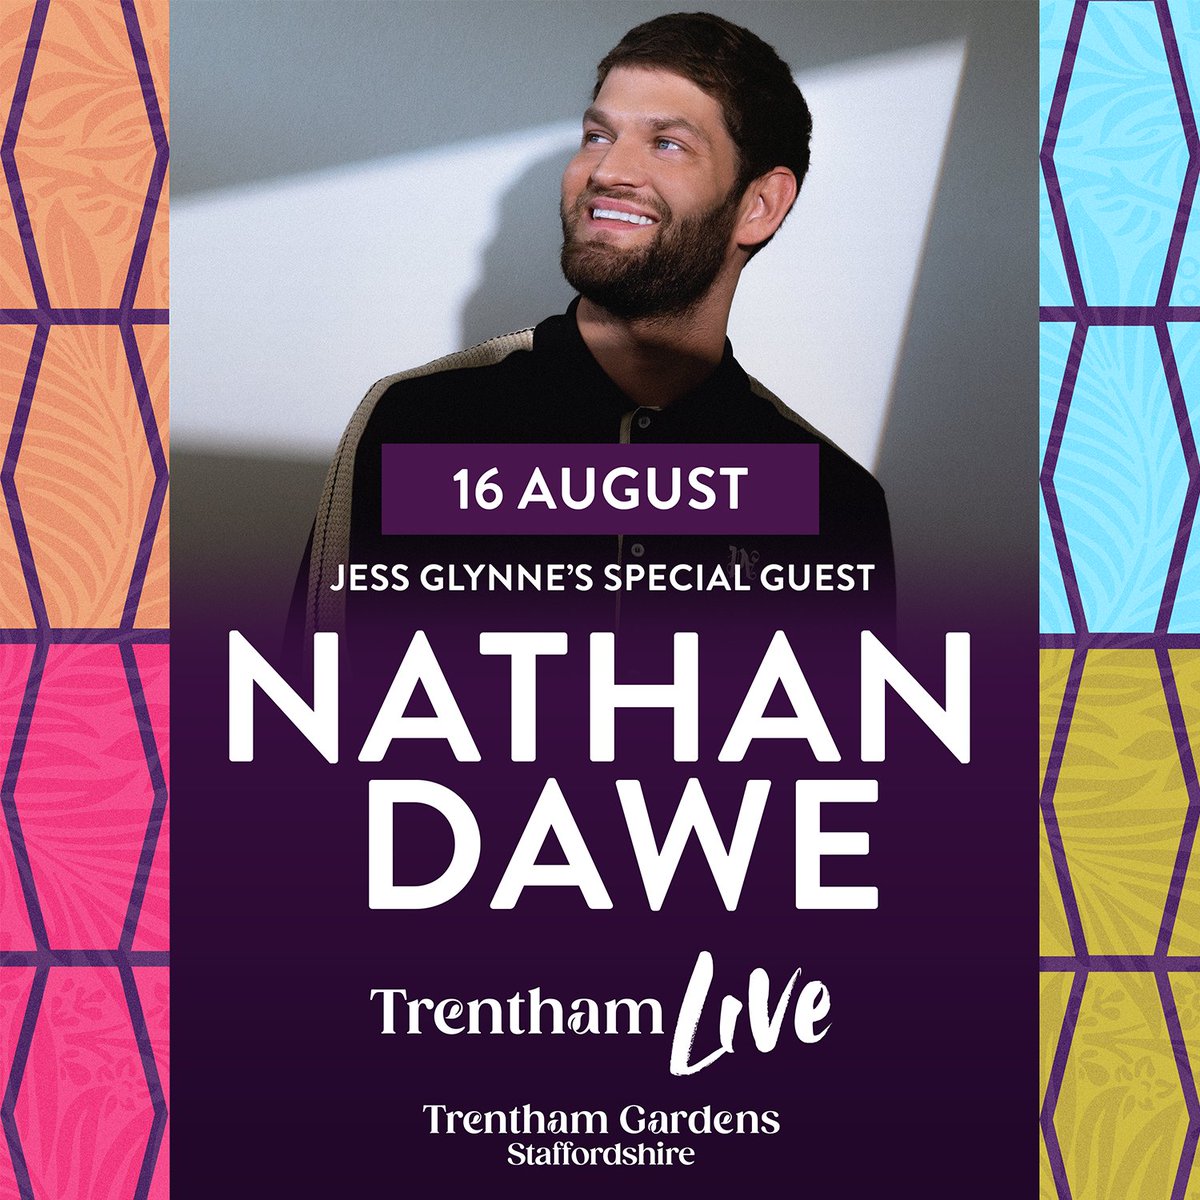 We're thrilled to announce that the incredible @NathanDawe will be joining our #TrenthamLive lineup as @JessGlynne's special guest on Friday 16th August! 🎶🎉  

Grab your tickets now -  you won't want to miss this! 👉 bit.ly/TrenthamLive20… #NathanDawe #JessGlynne